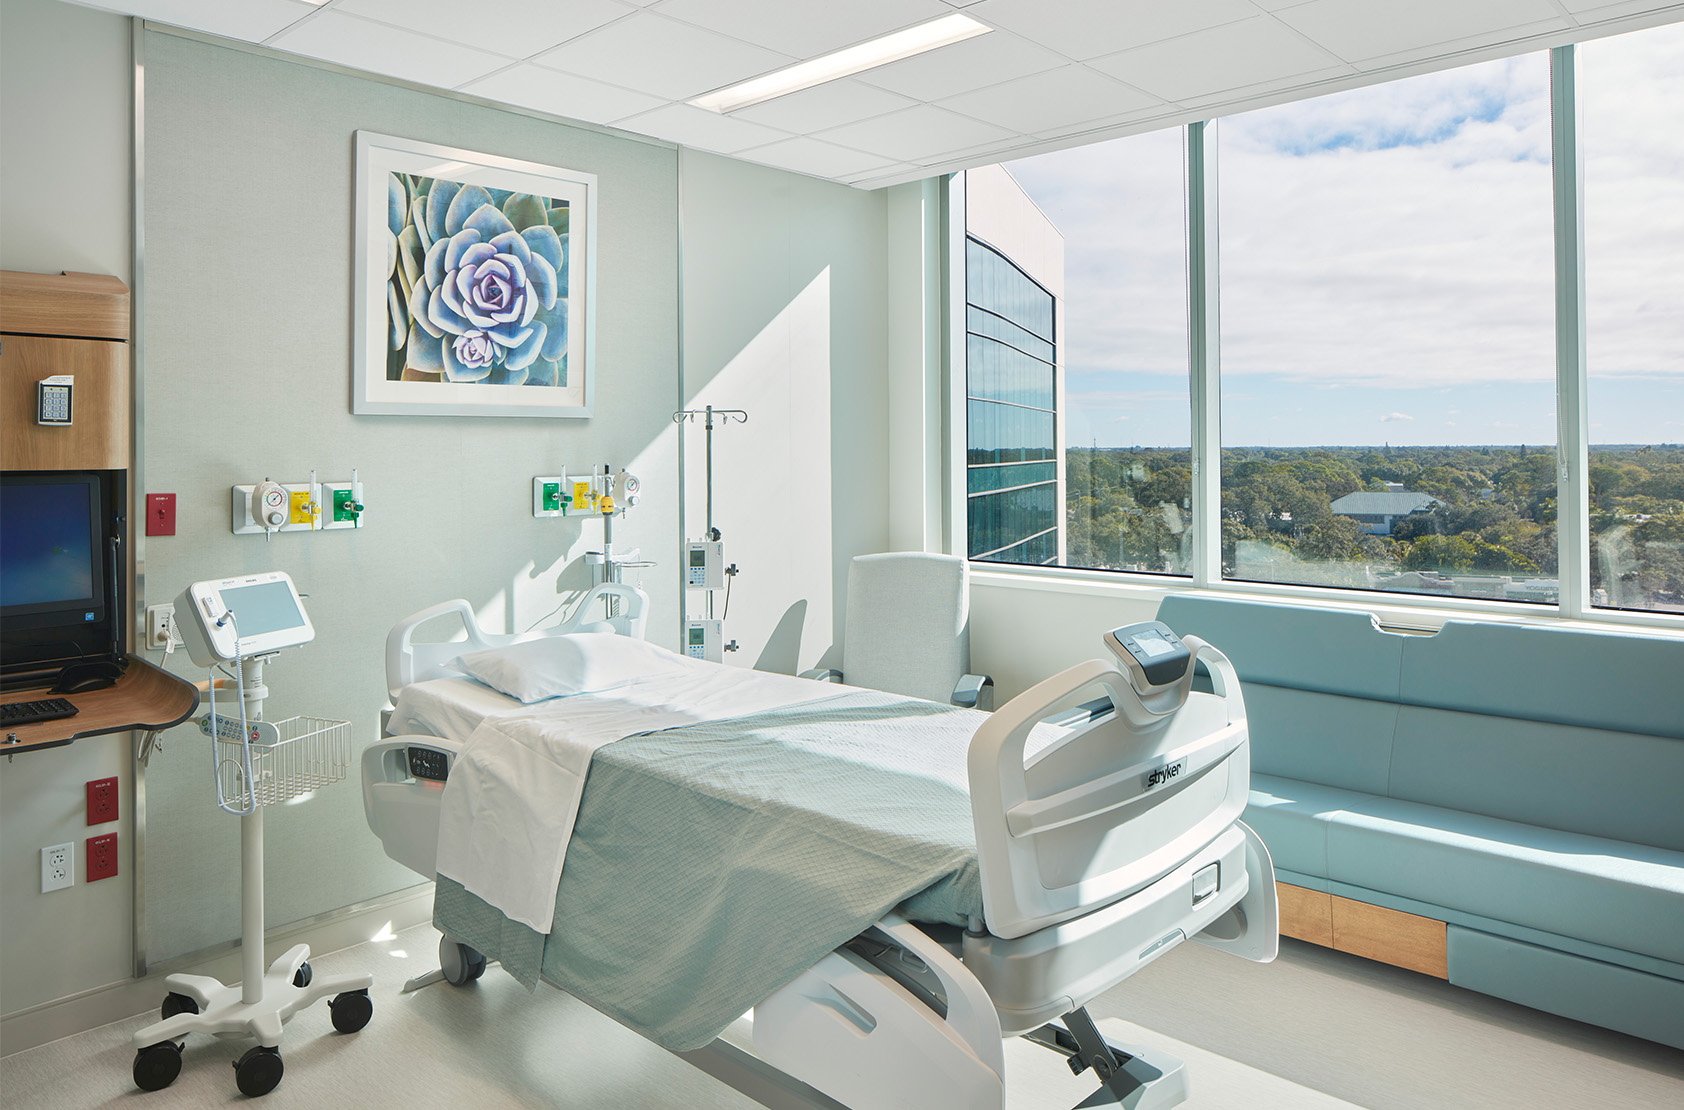 Sarasota Memorial Hospital - Oncology Inpatient and Surgical Tower